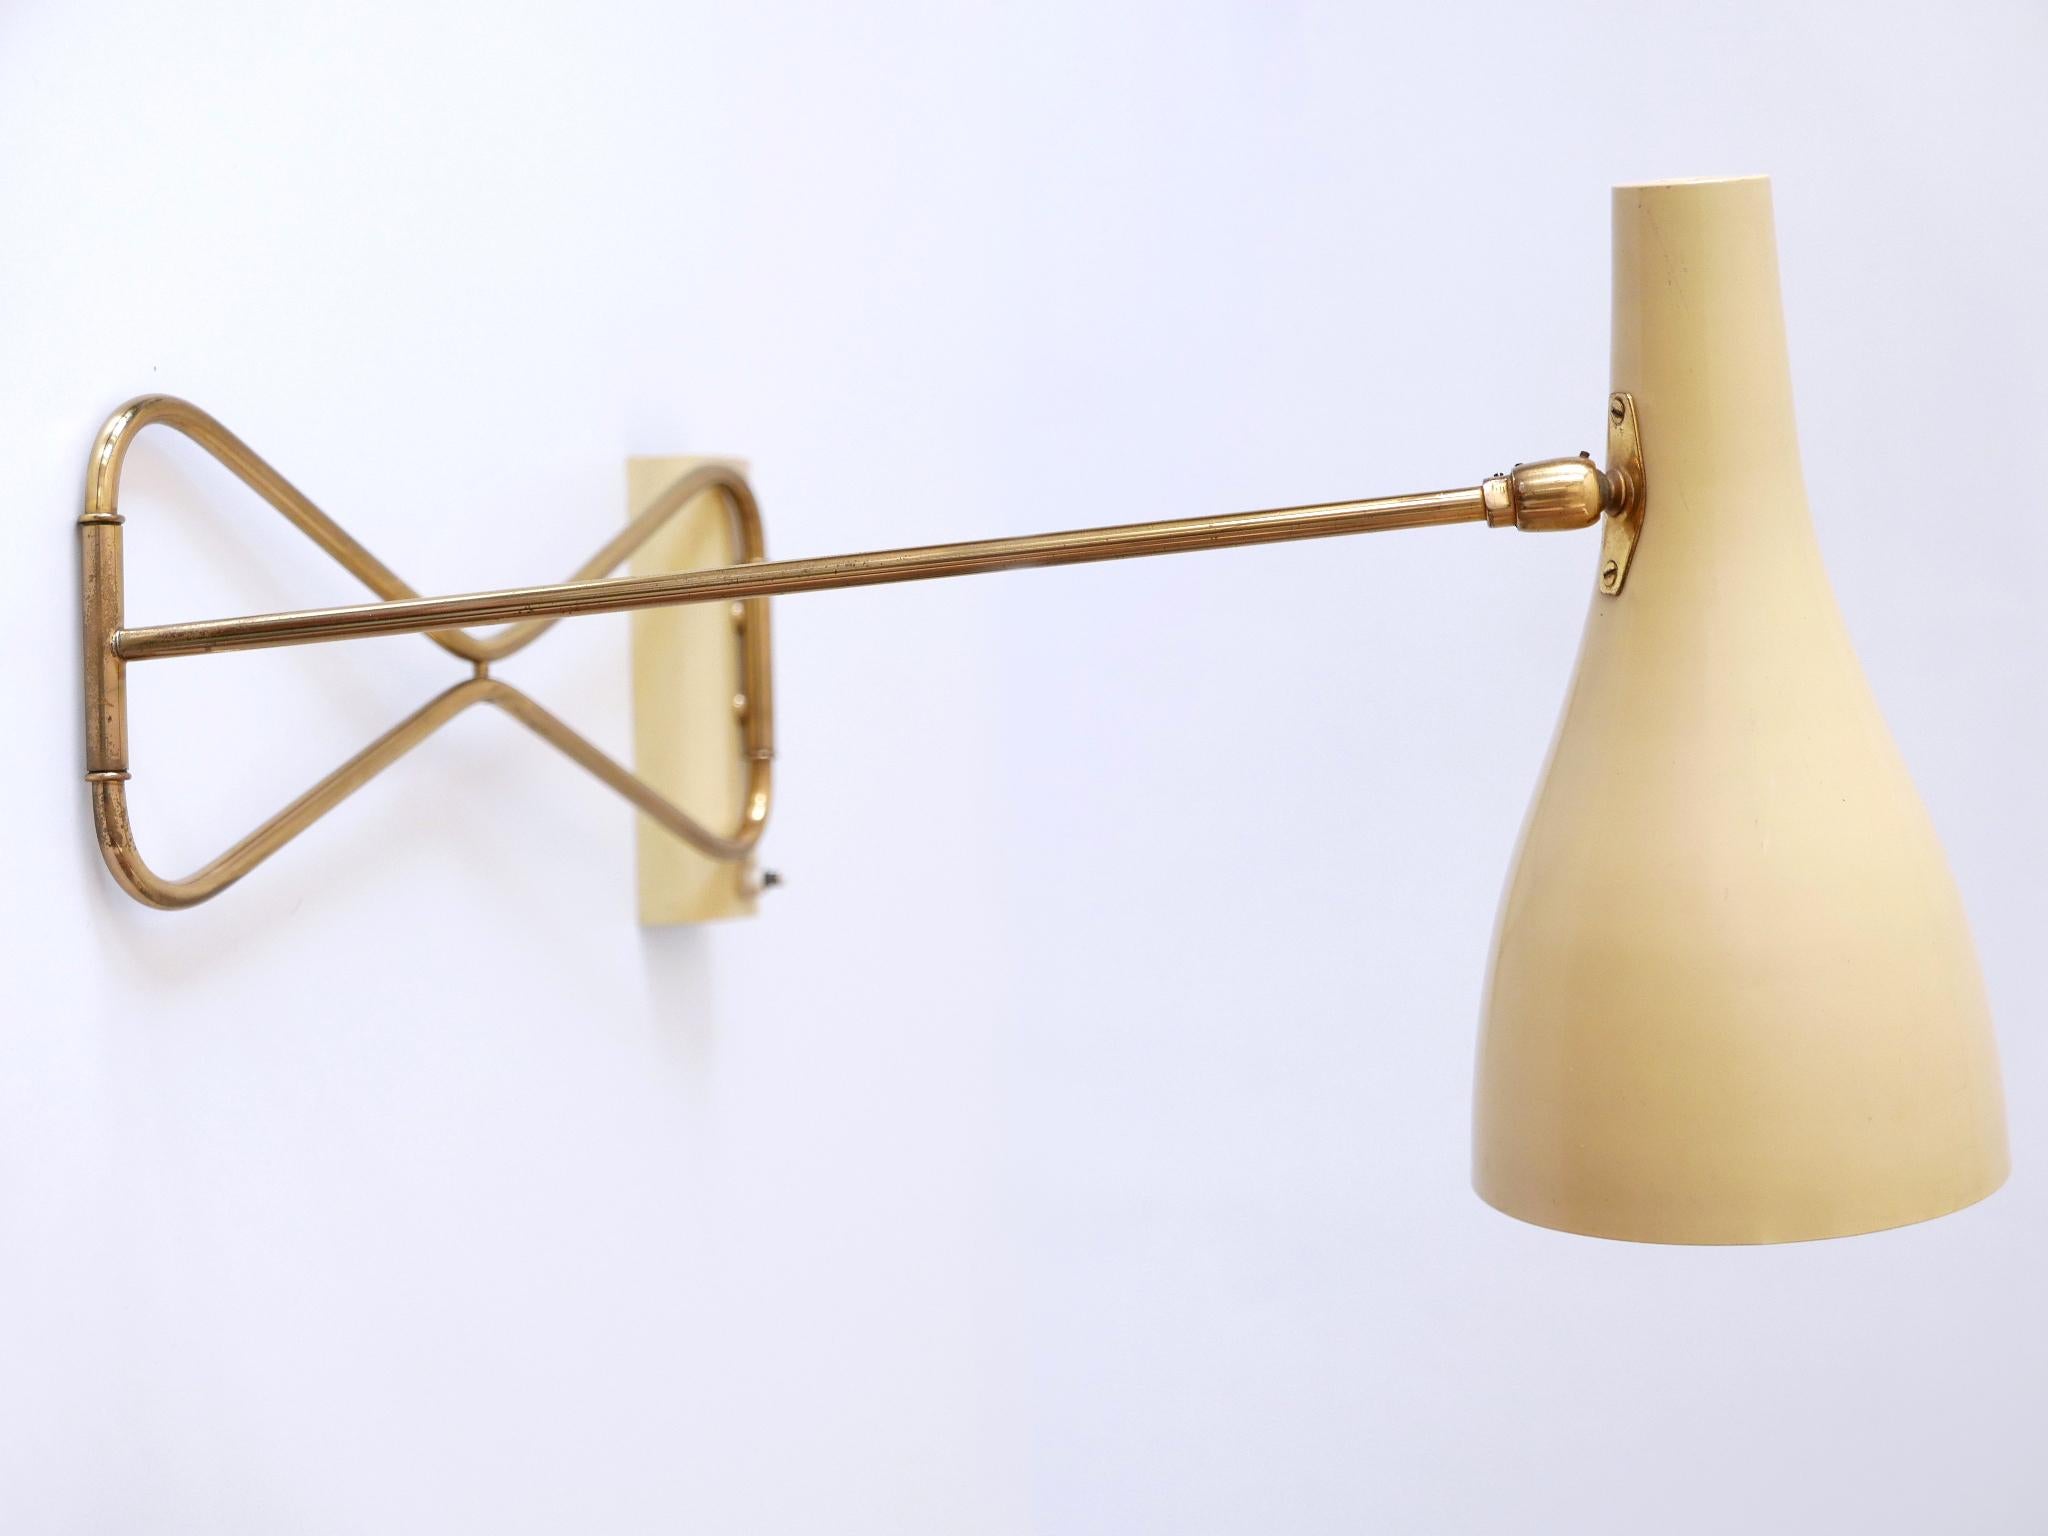 Rare & Elegant Mid Century Modern Wall Lamp '9590/28' by Cosack Germany 1950s In Good Condition For Sale In Munich, DE